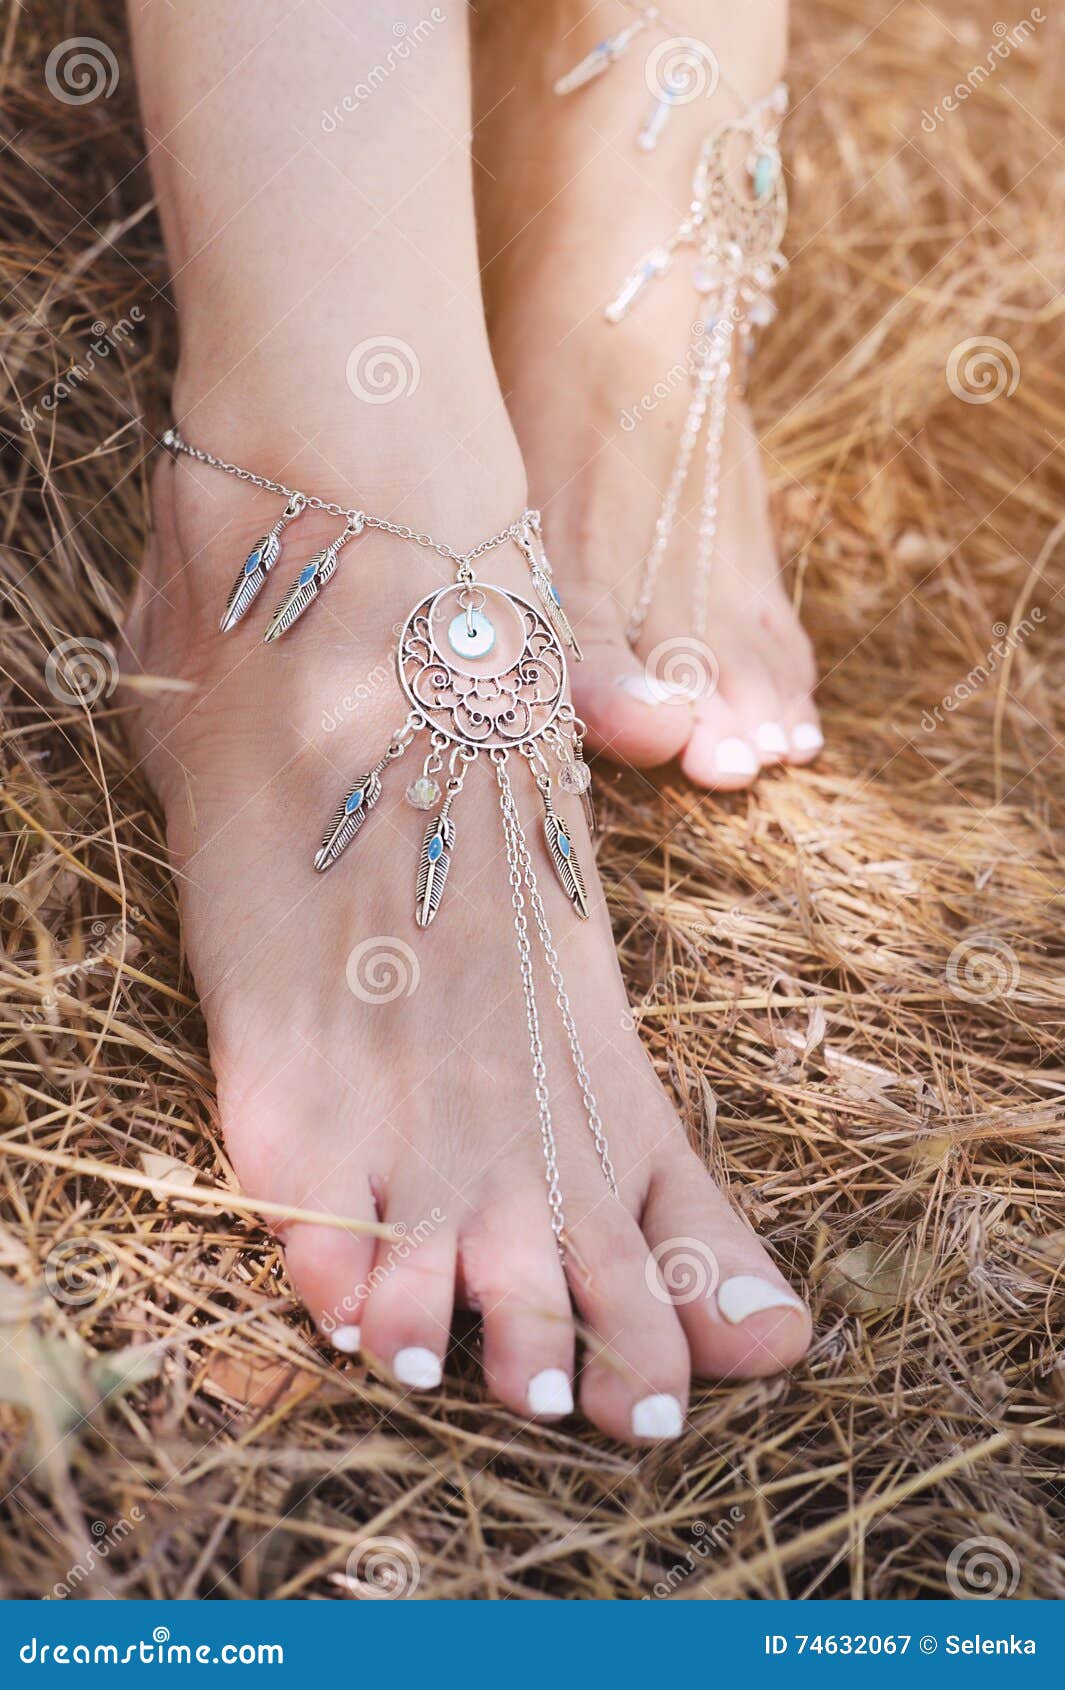 handcrafted bracelets on a woman legs, close up, white pedicure